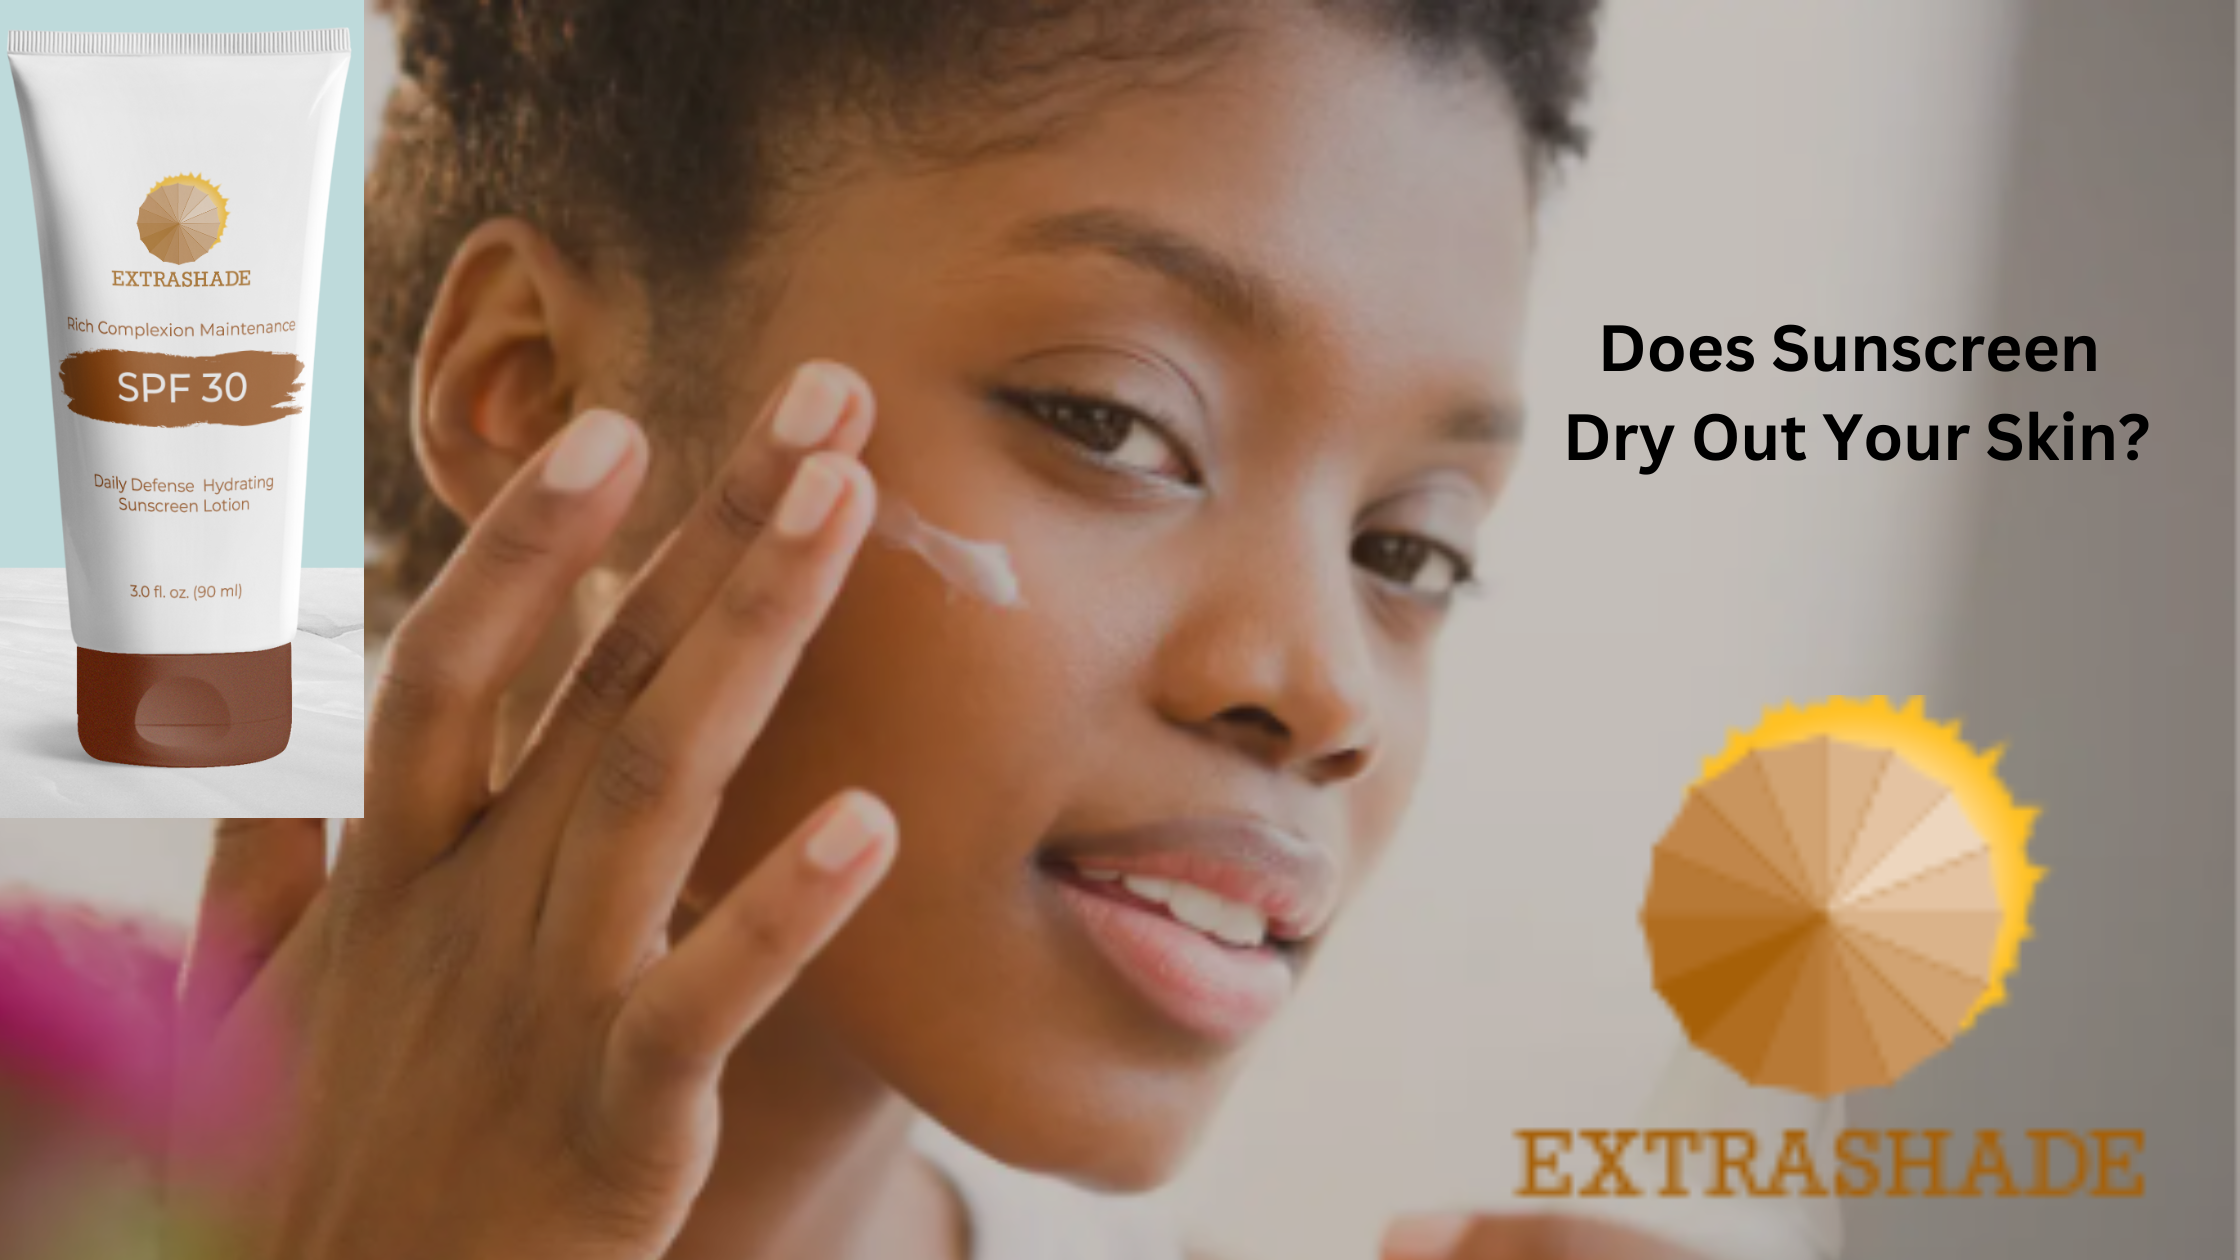 Does Sunscreen Dry Out Your Skin